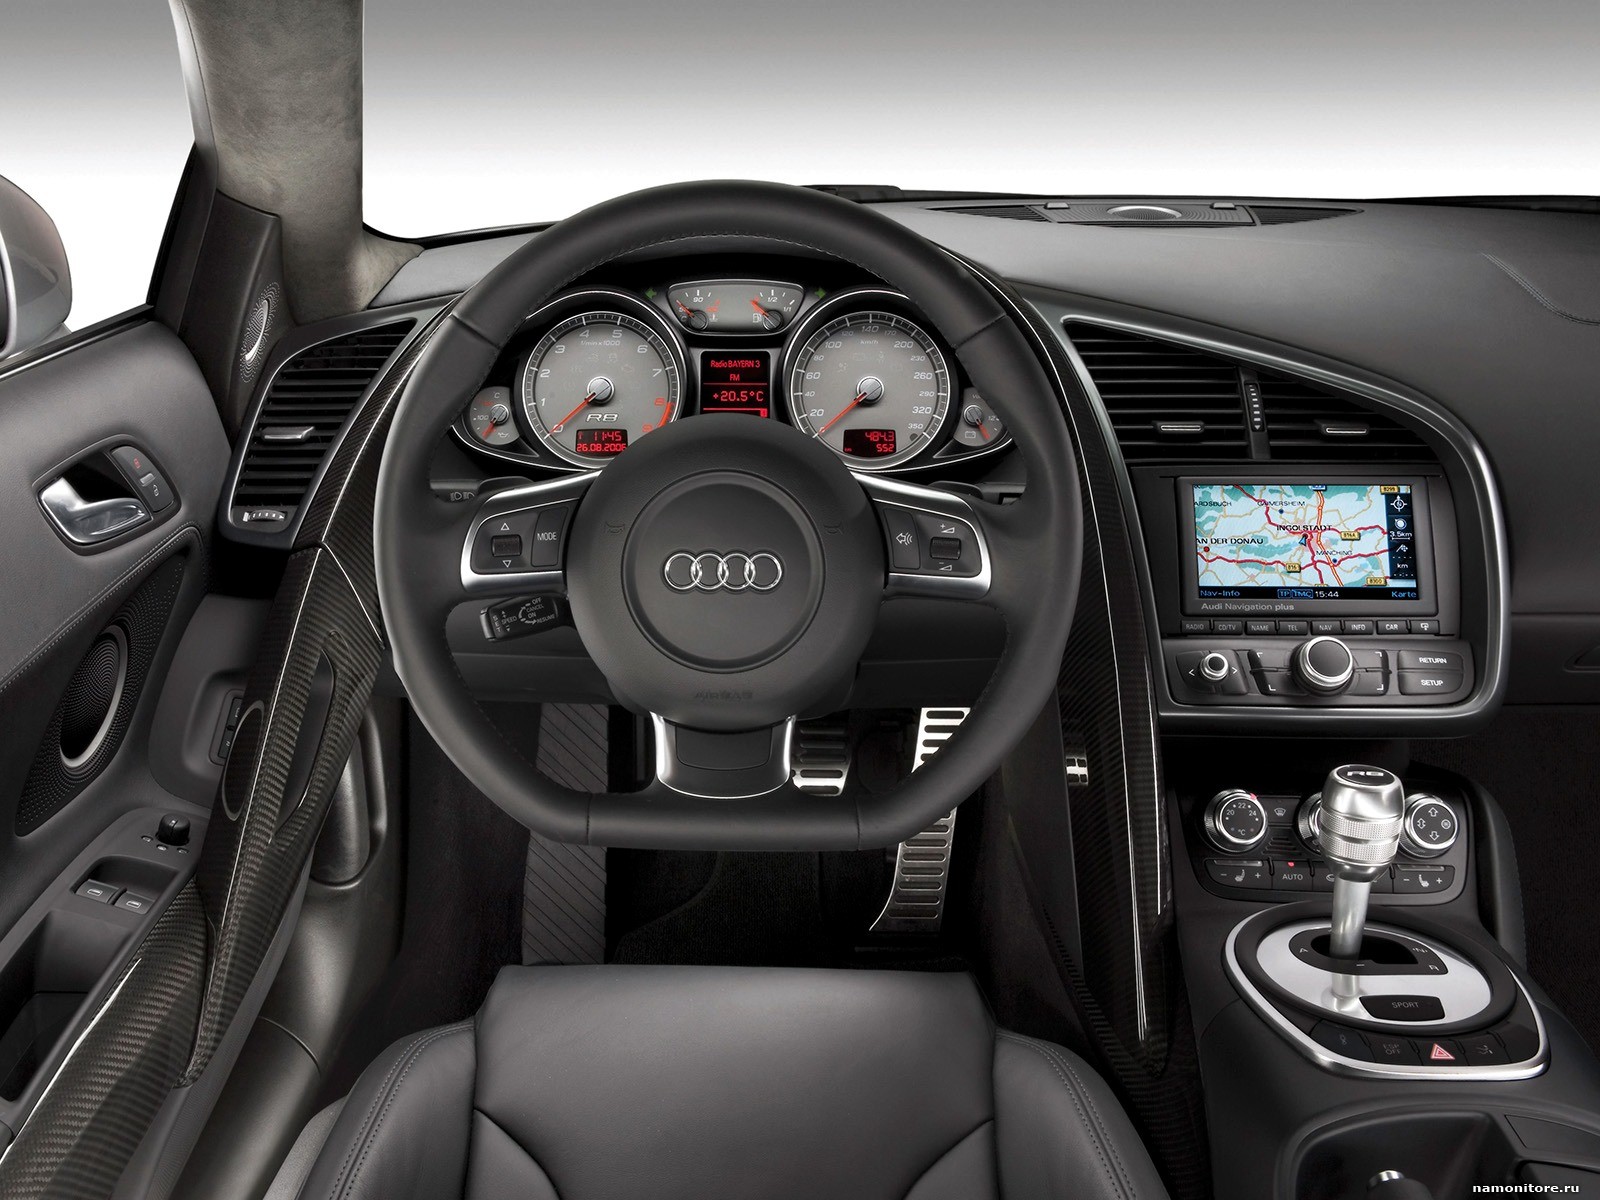 black Cabin Audi, photo in high definition, download 